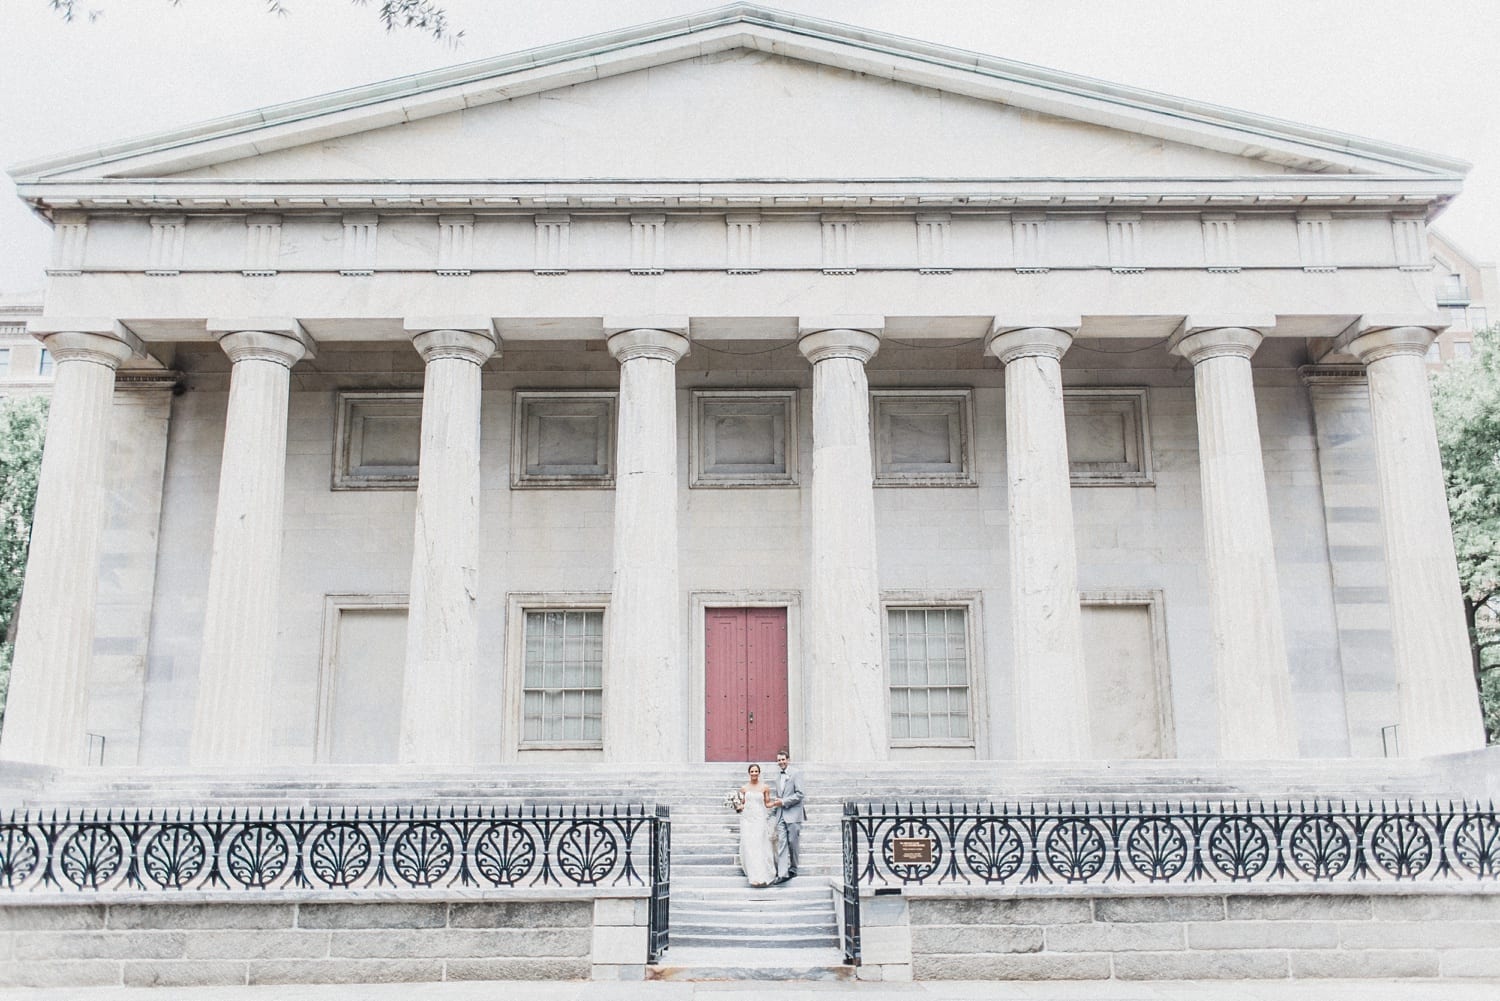 Christ Church and The Downtown Club Wedding Photographer